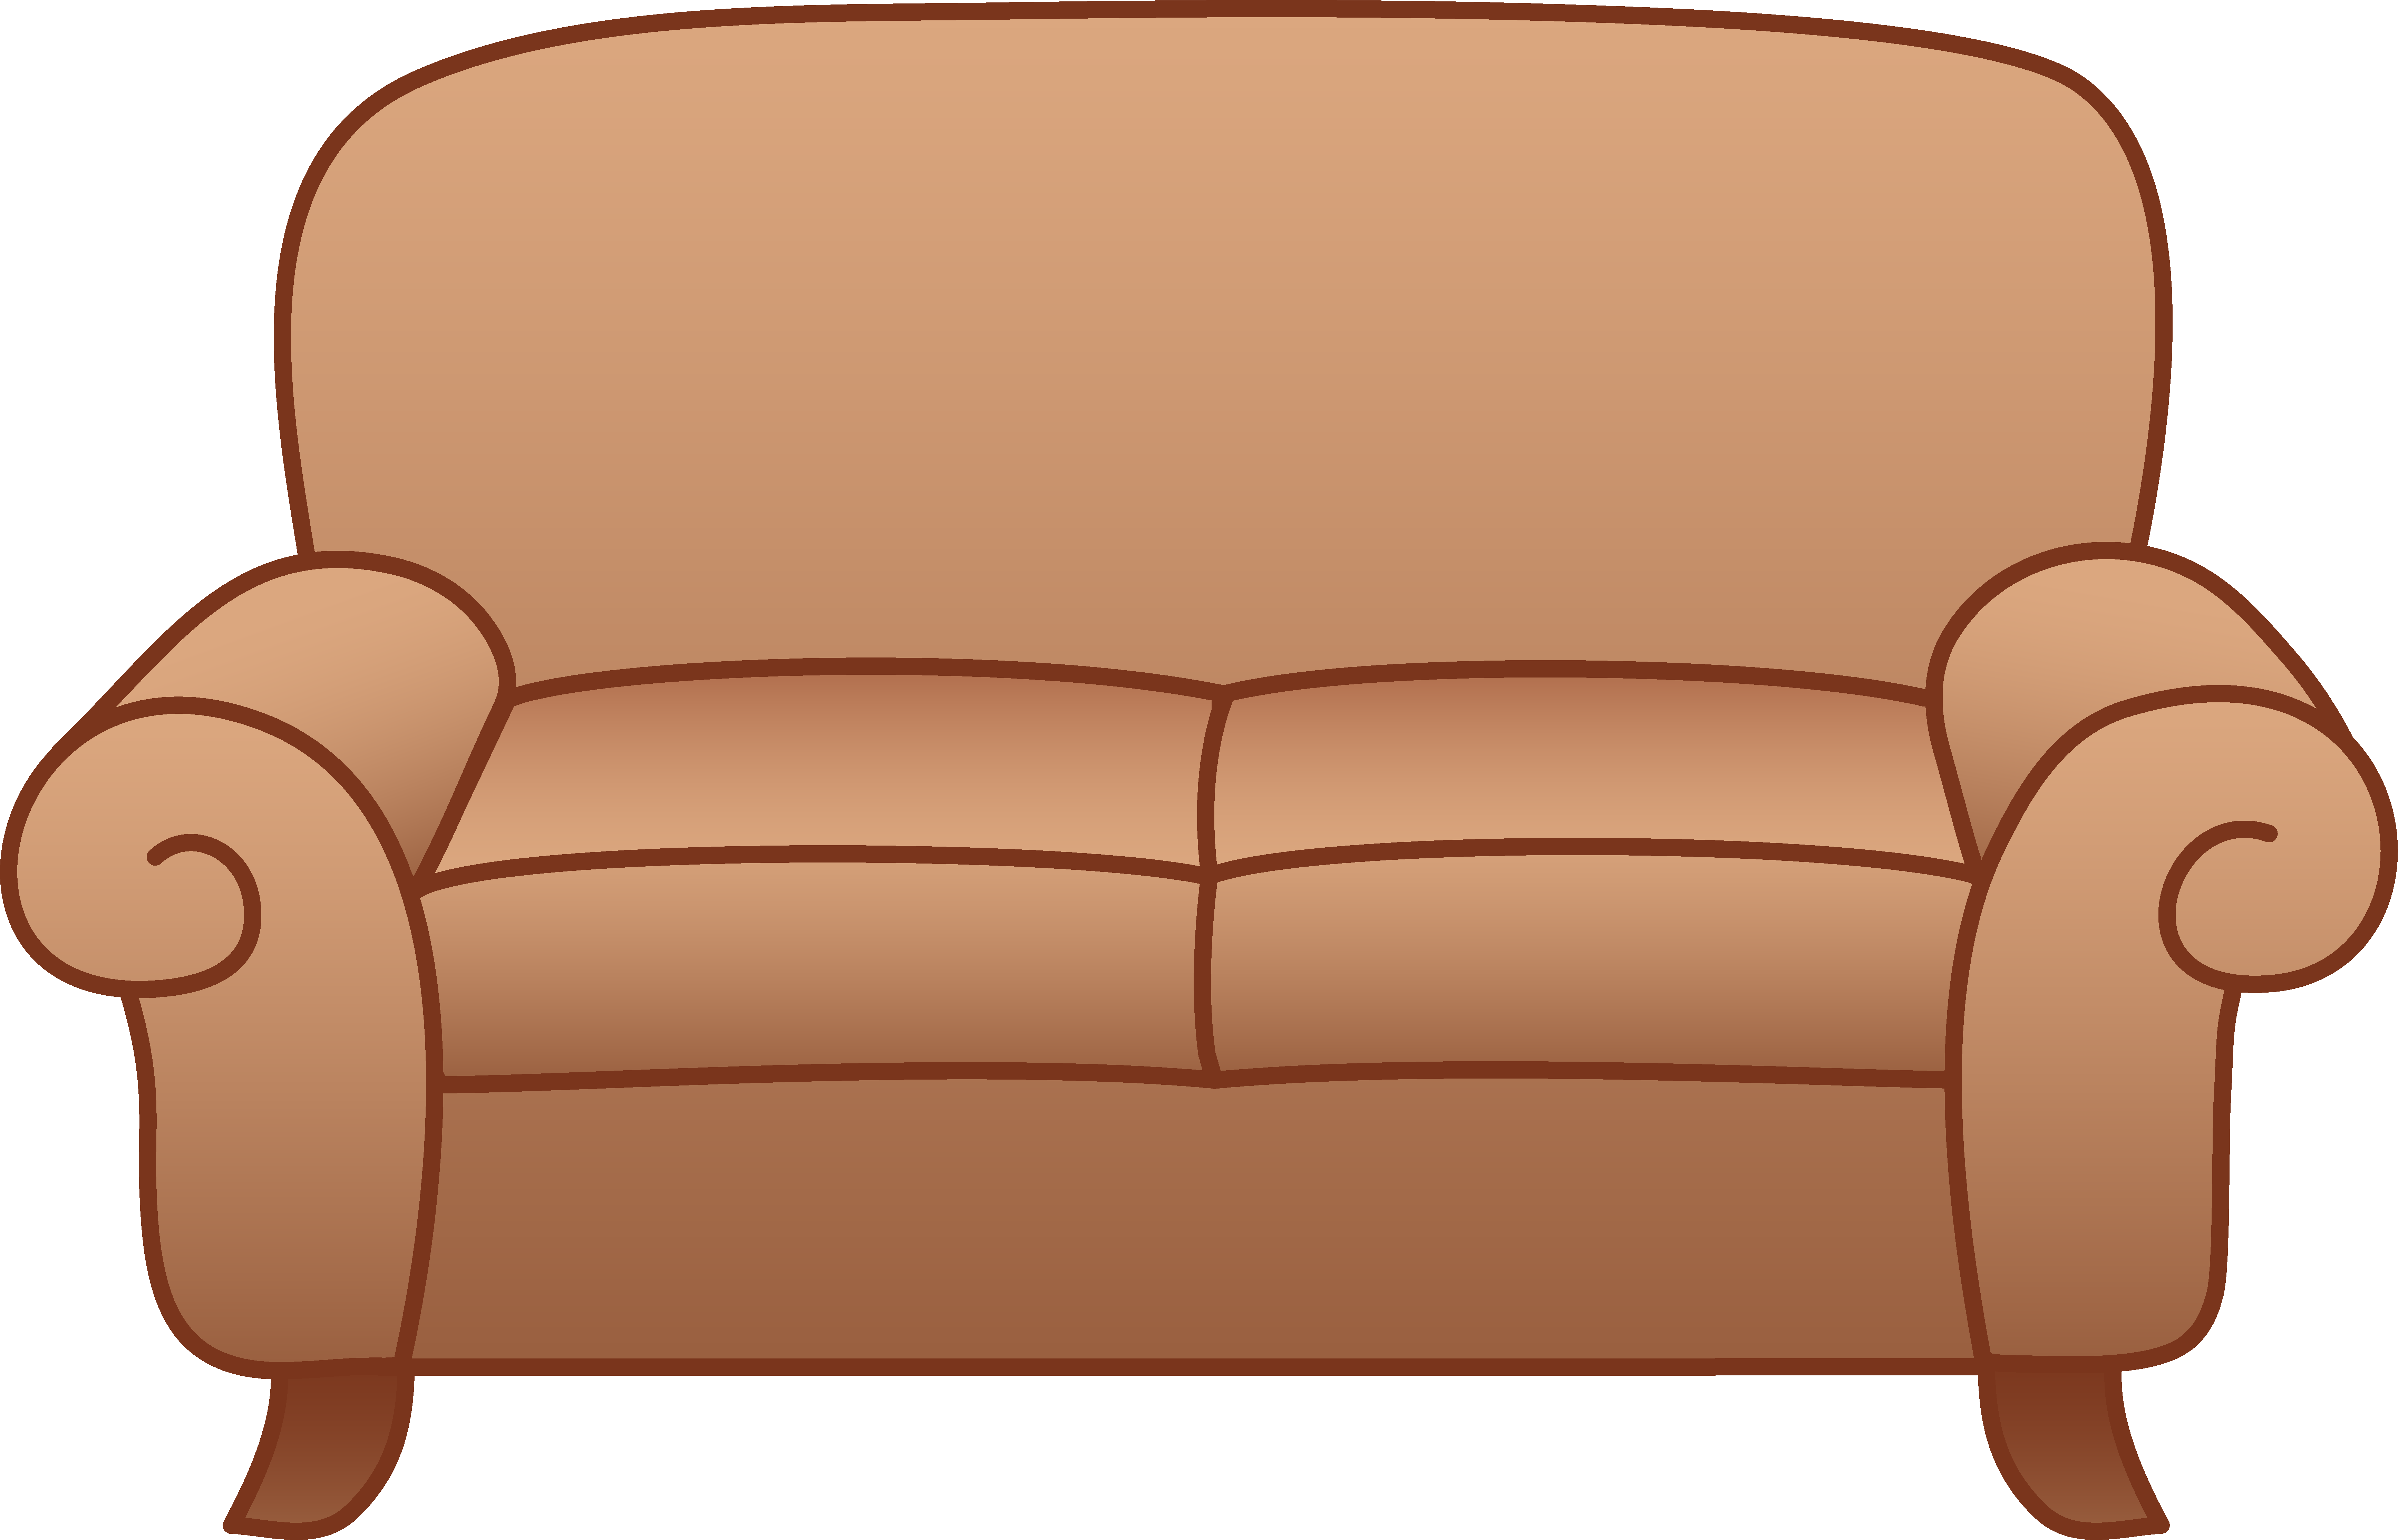 Hill clipart bohol drawing. Couch 